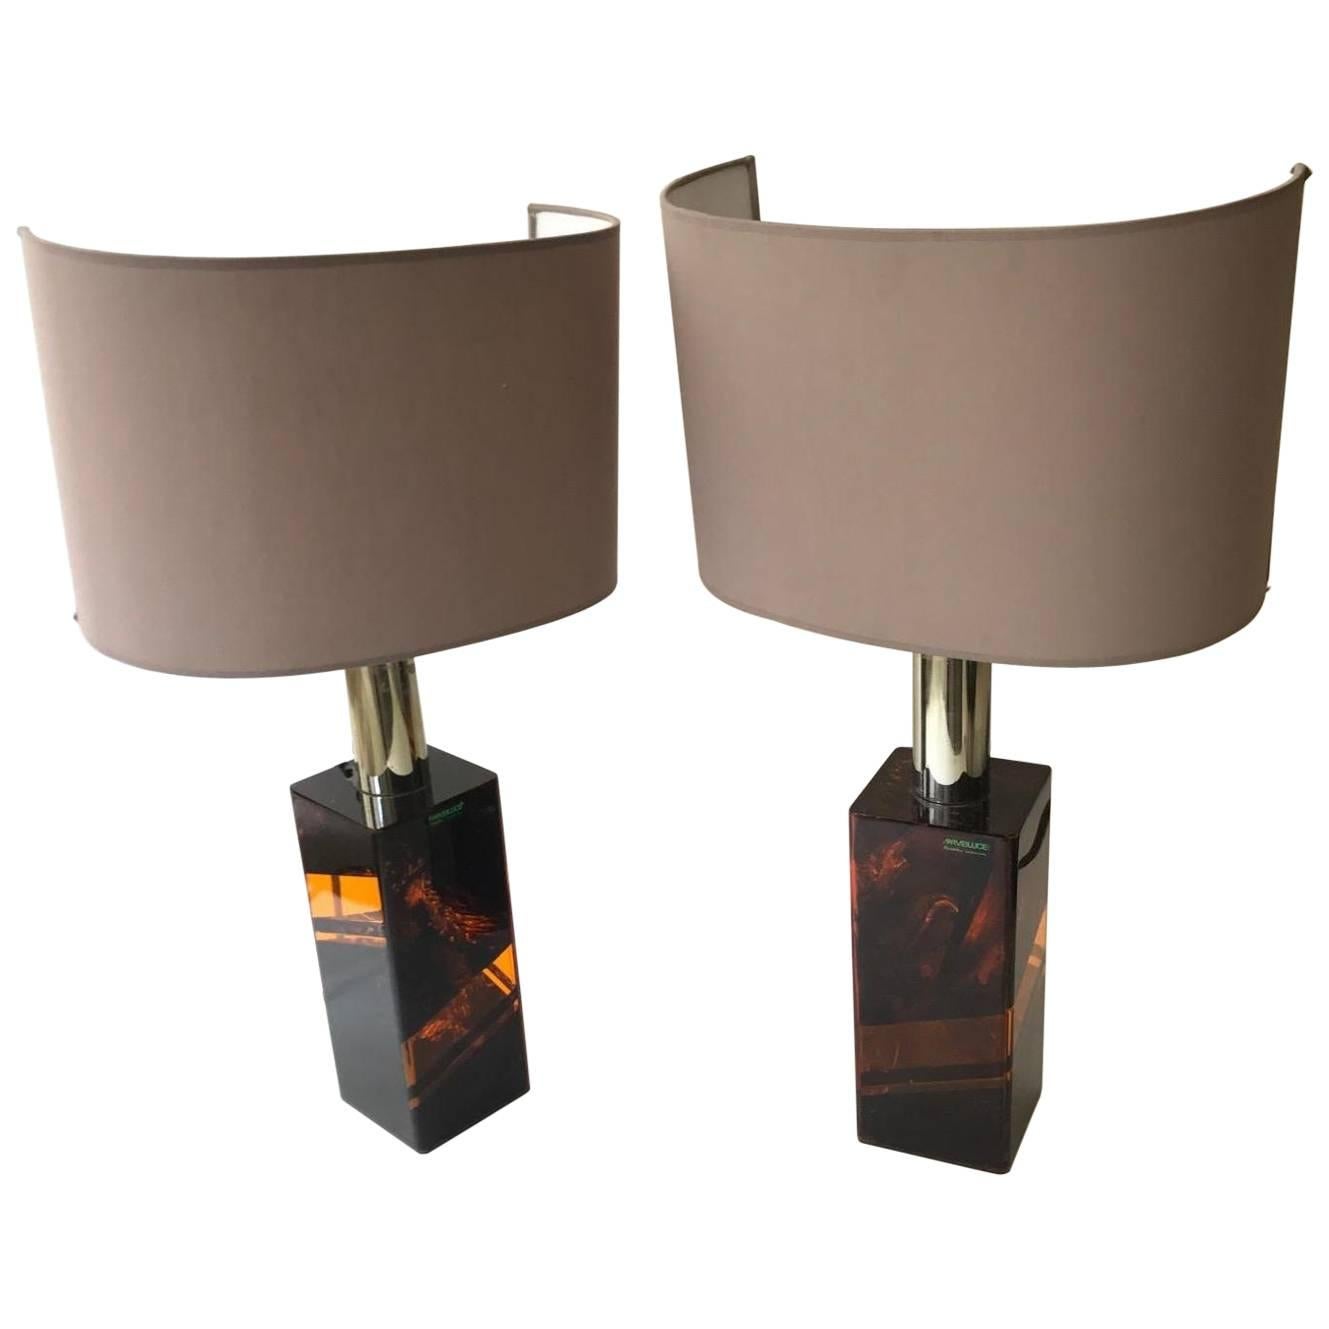 Italian, 1970s Pair of Lucite Table Lamps For Sale